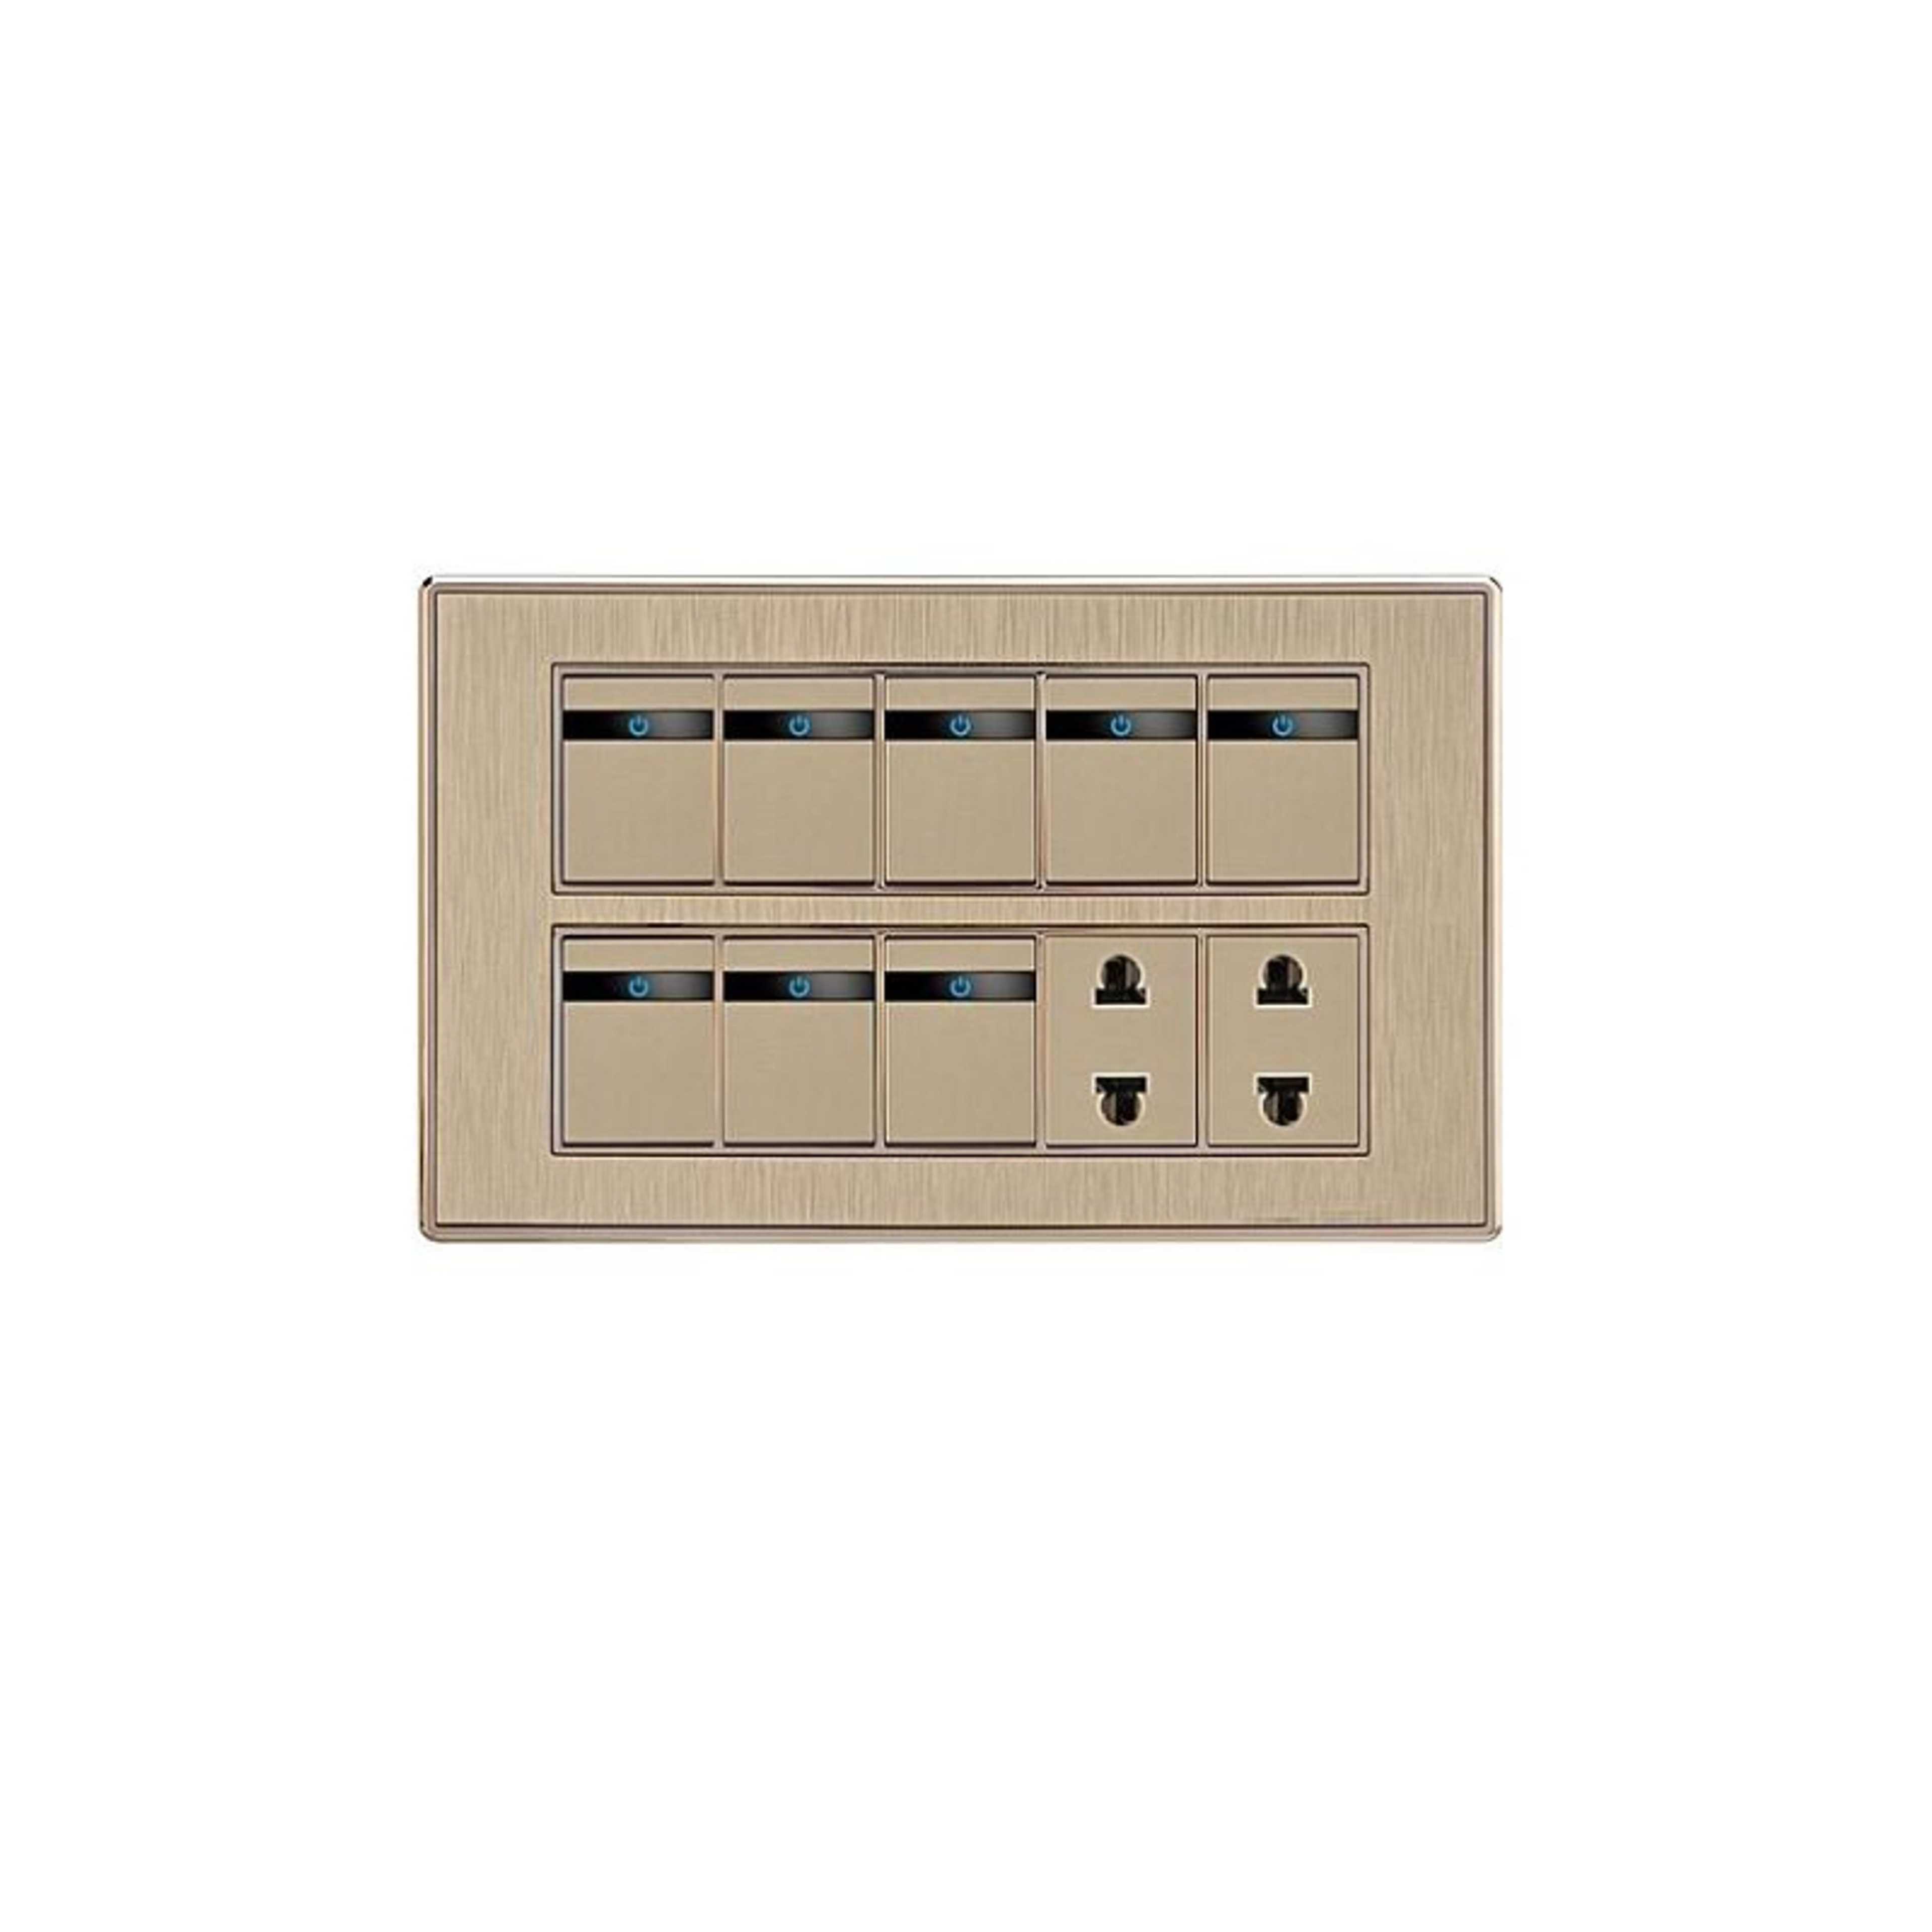 China Fitting Switch & Sockets (8 Buttons and 2 Socket)